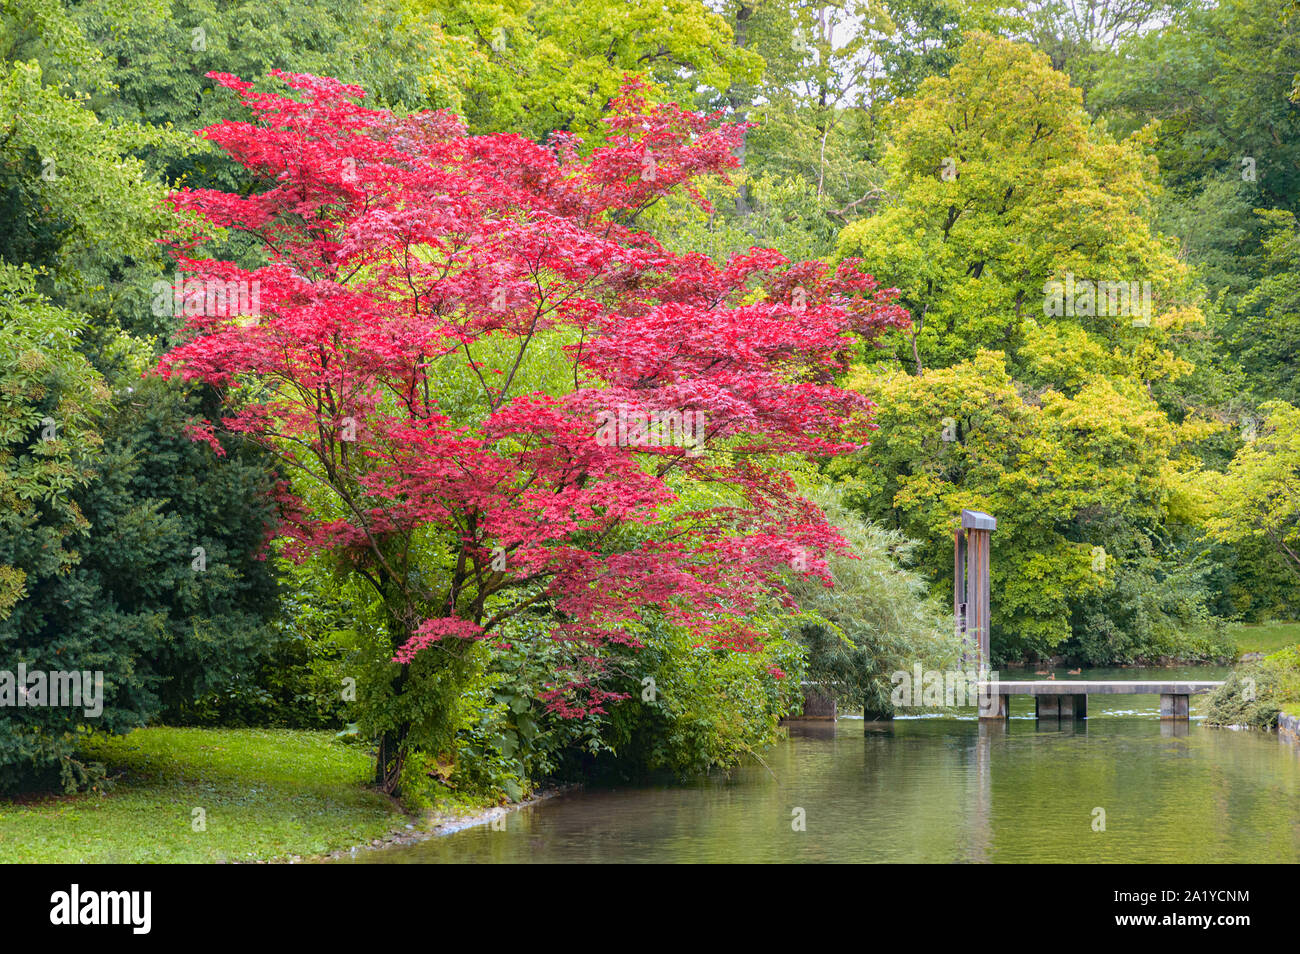 Tree with red colored foliage growing on shore of creek with wooden bridge in autumn park Stock Photo